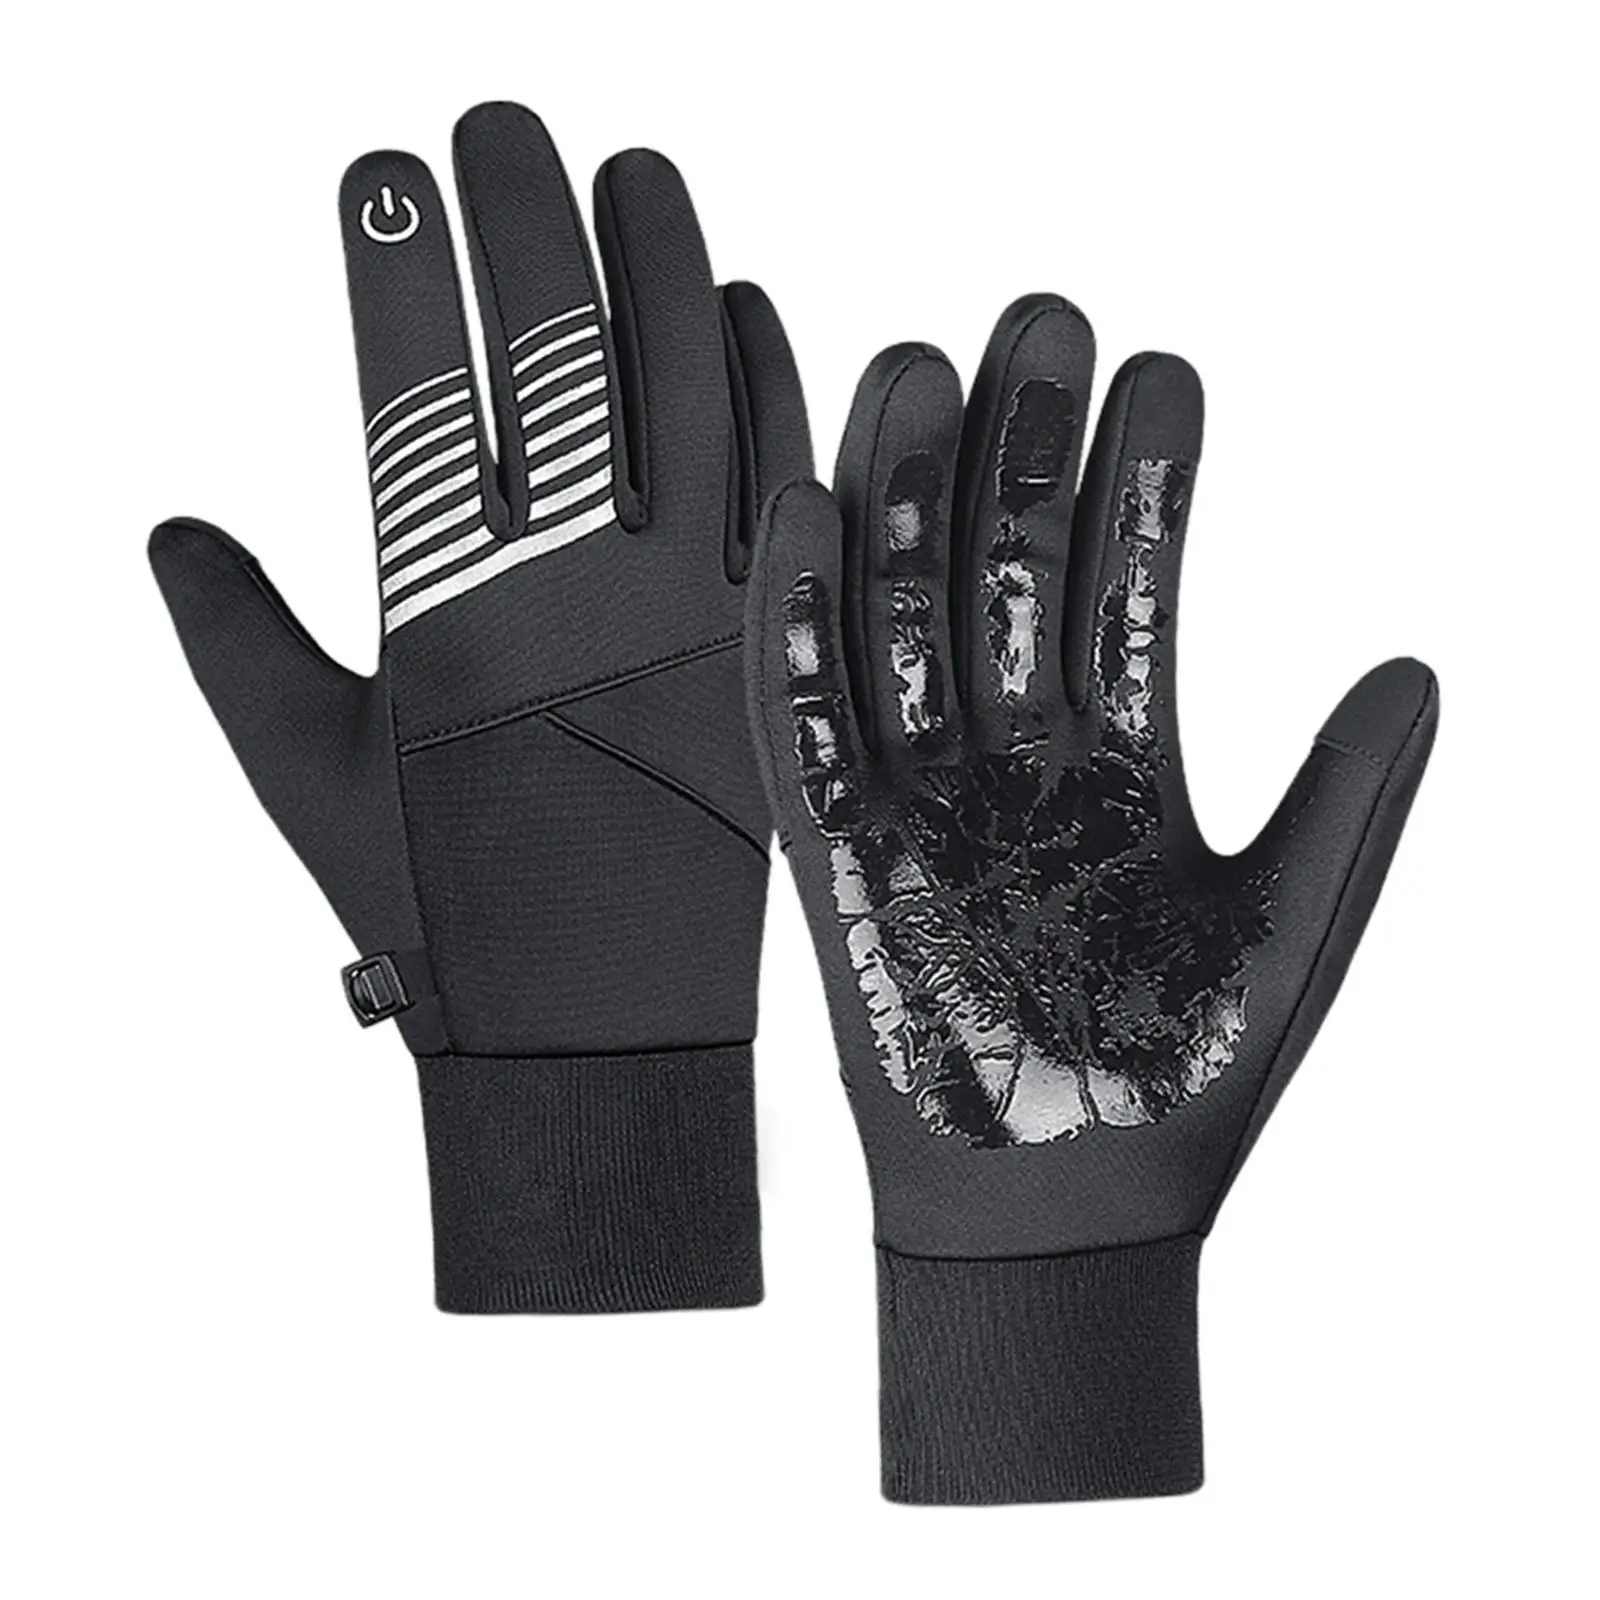 Winter Gloves Waterproof Wear Resistant Non Slip Palm for Skating